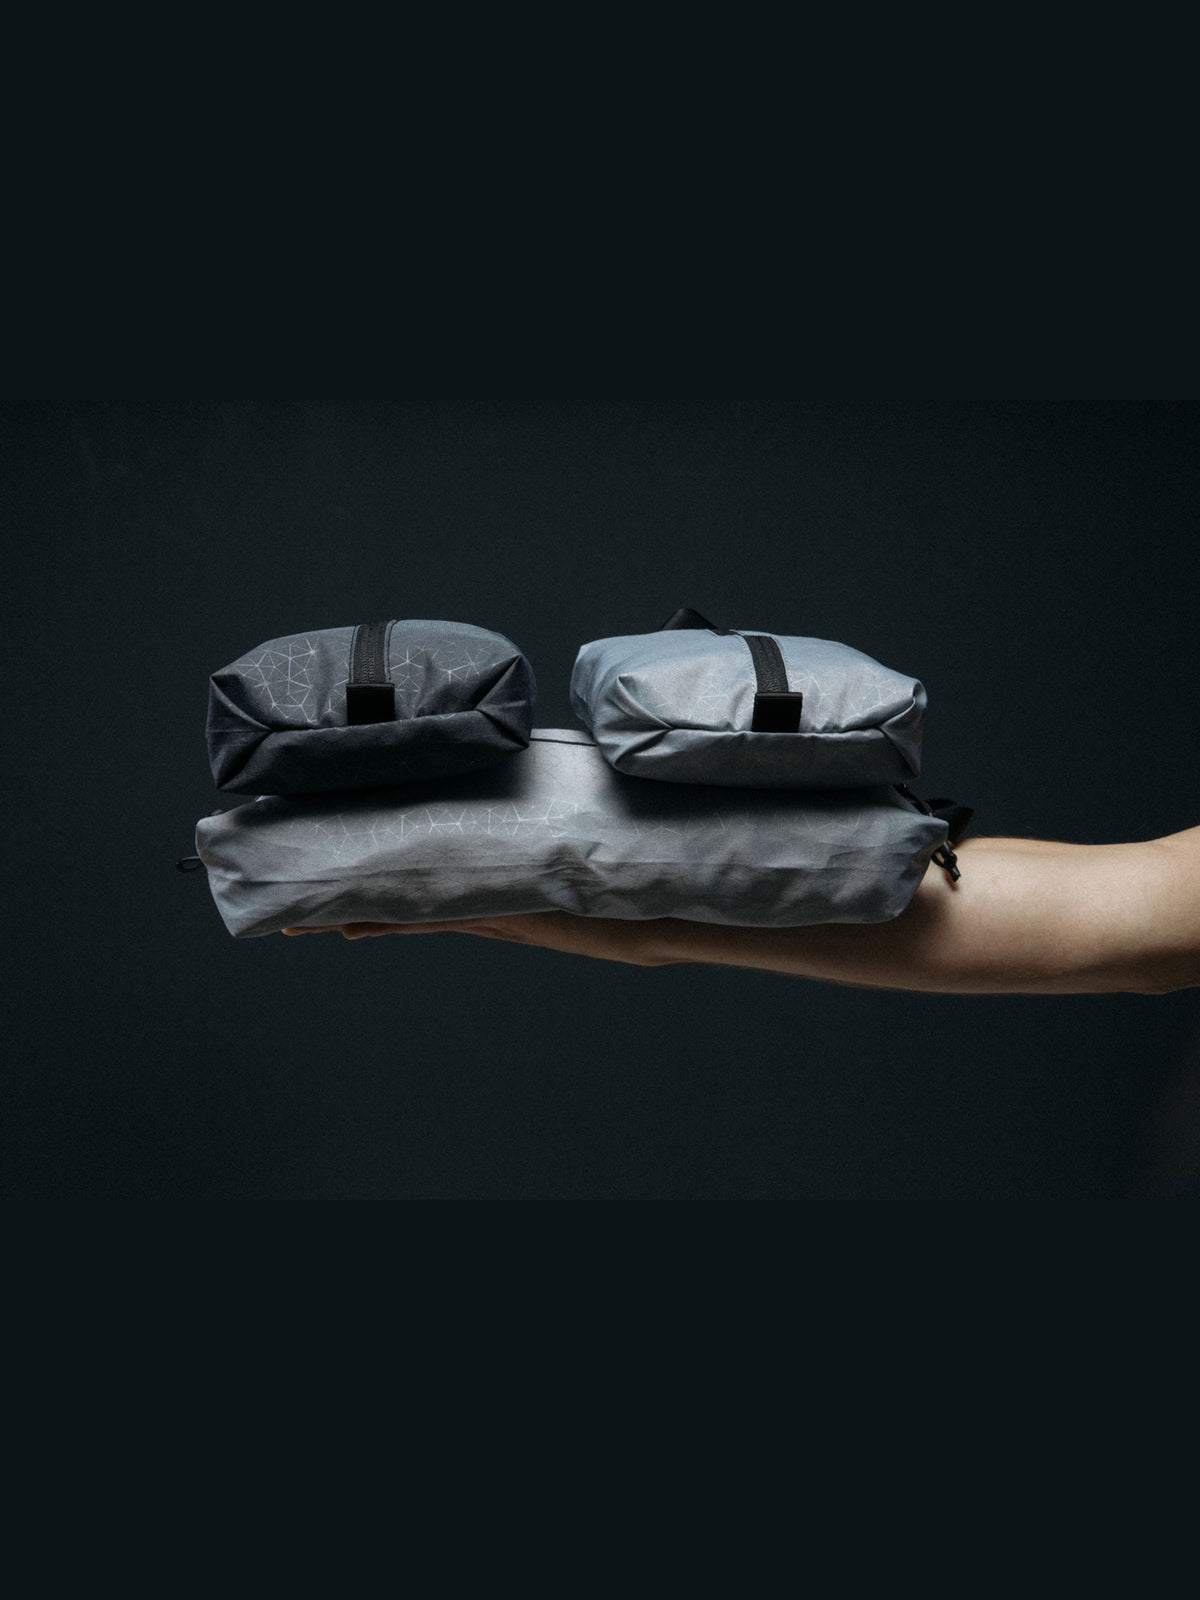 Heimplanet Carry Essentials Packing Cubes Set (1x Large &amp; 2x Small)